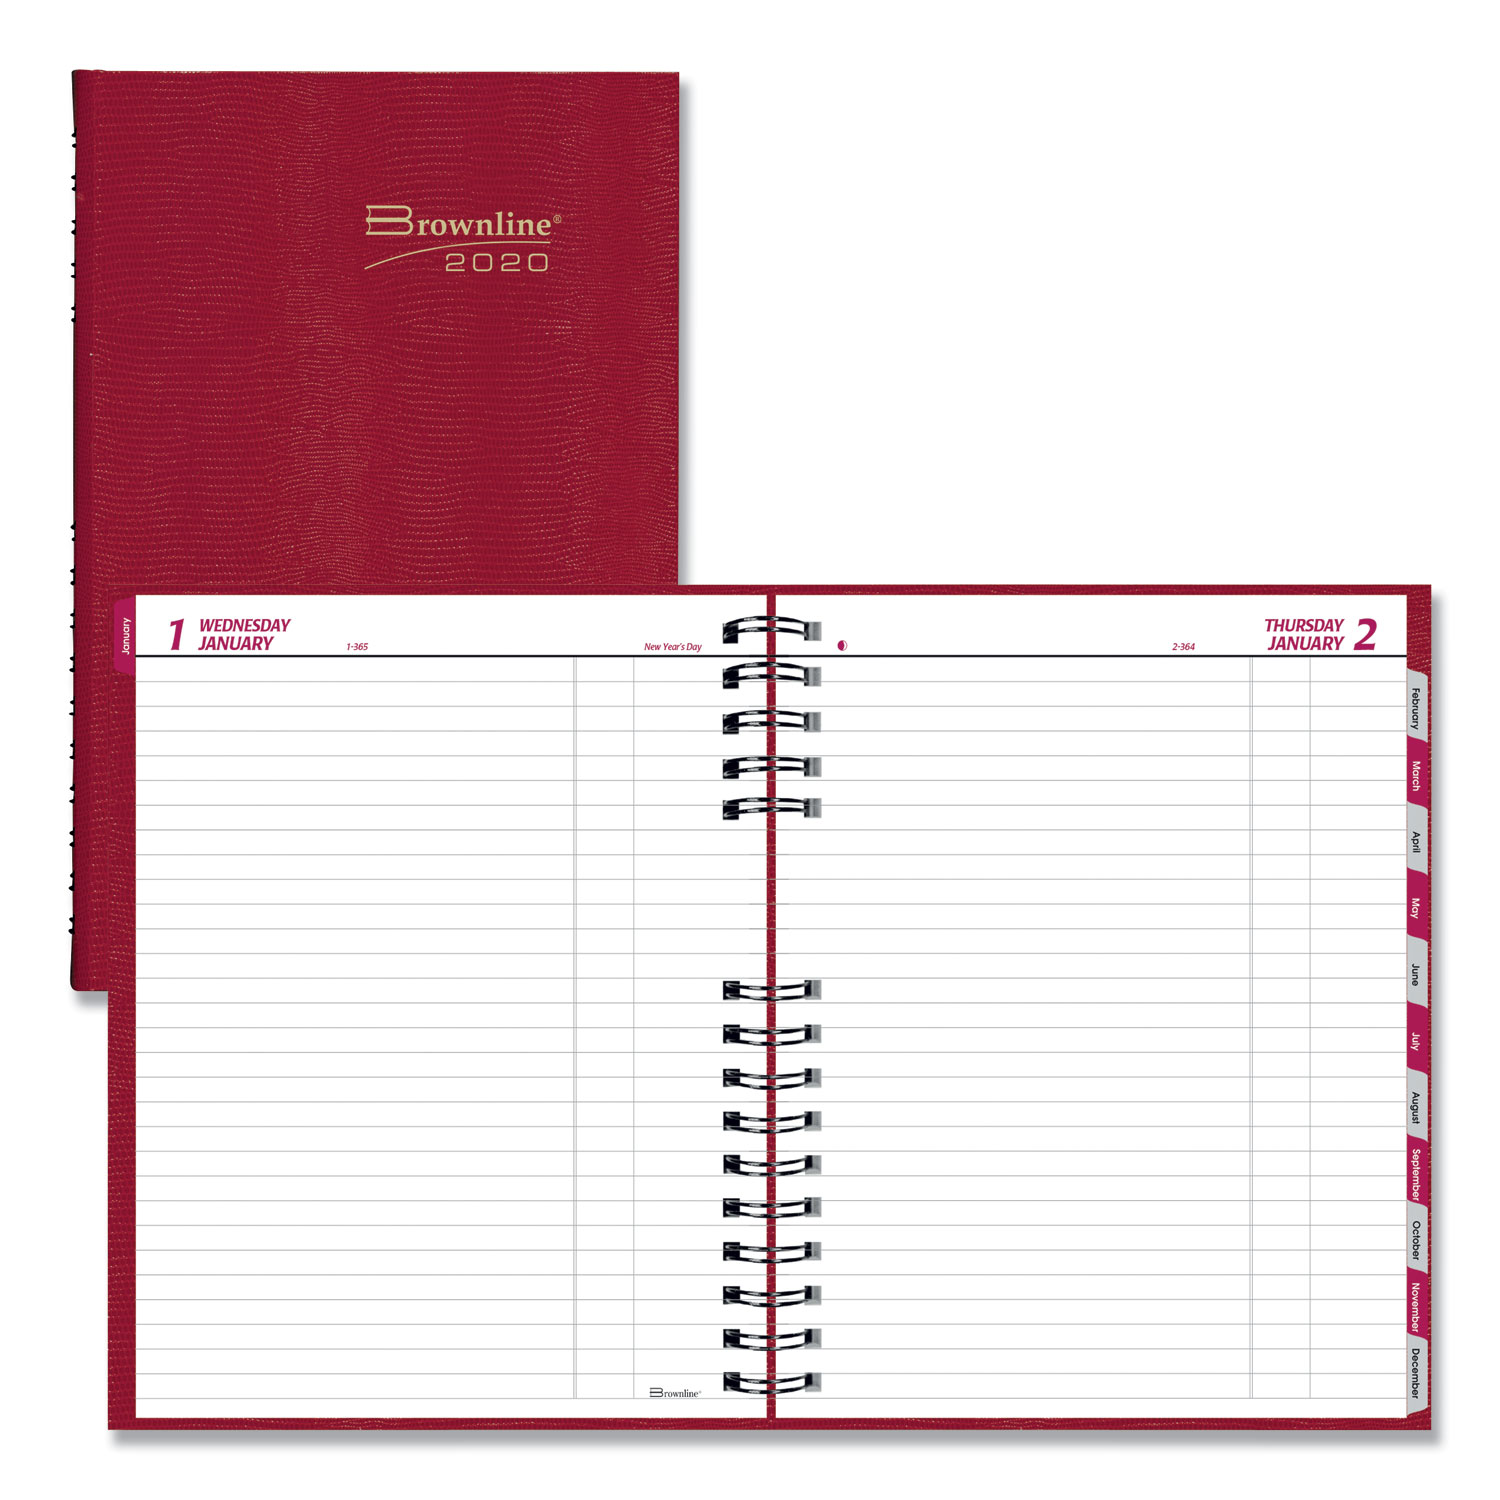  Brownline C550C.RED CoilPro Daily Planner, Ruled, 1 Page/Day, 10 x 7 7/8, Red, 2020 (REDC550CRED) 